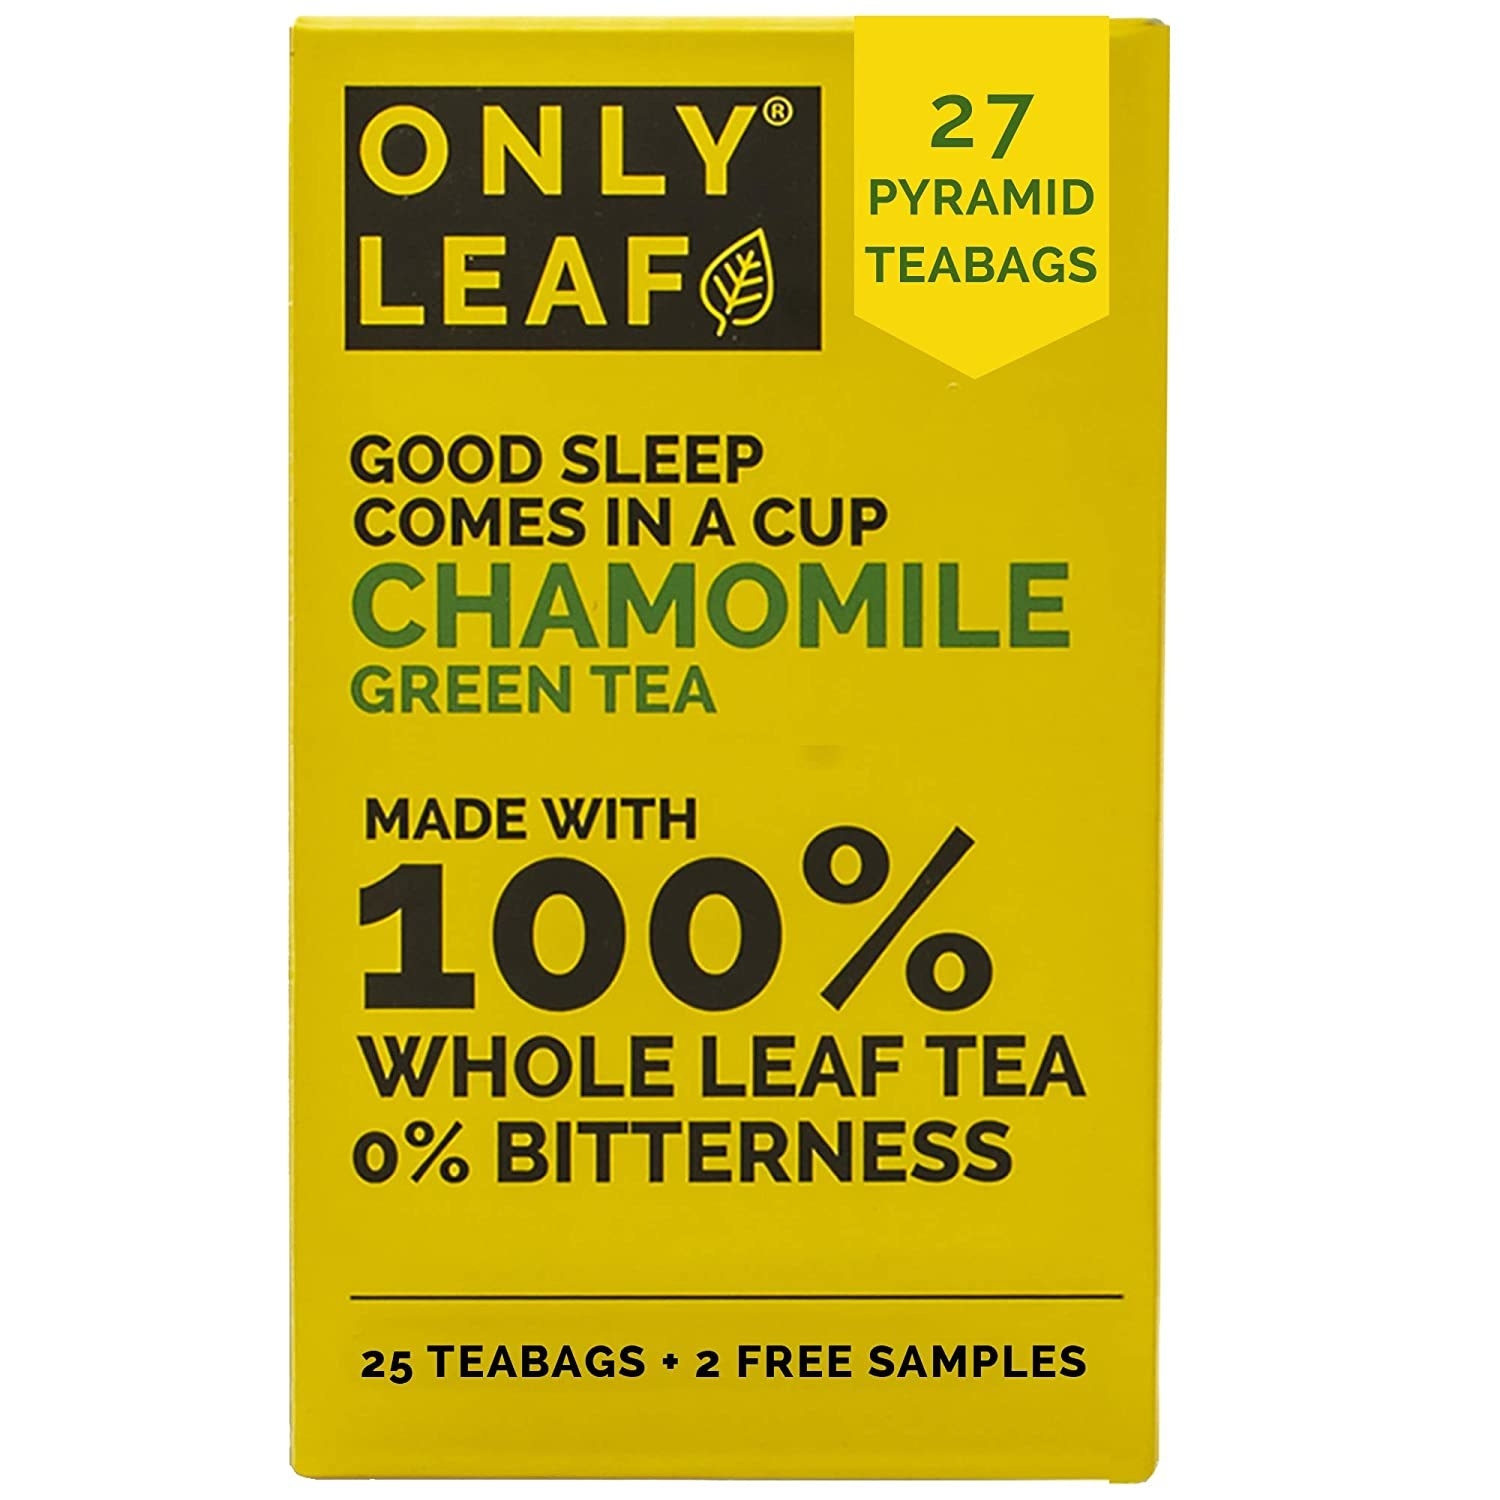 Packaging of the teabags